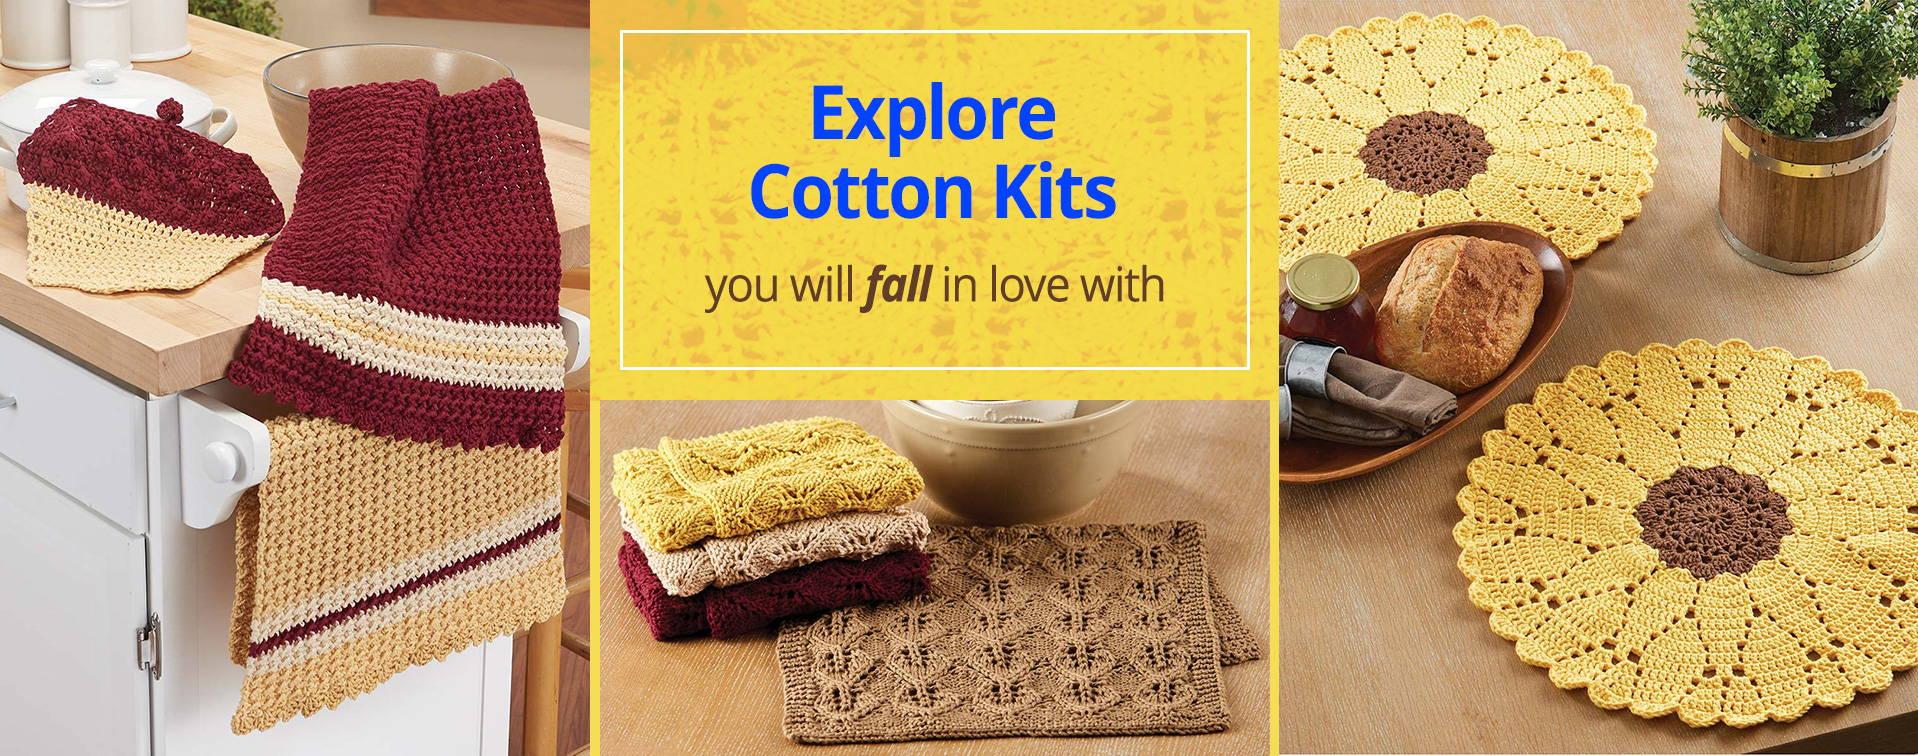 Explore Cotton Kits You will fall in love with